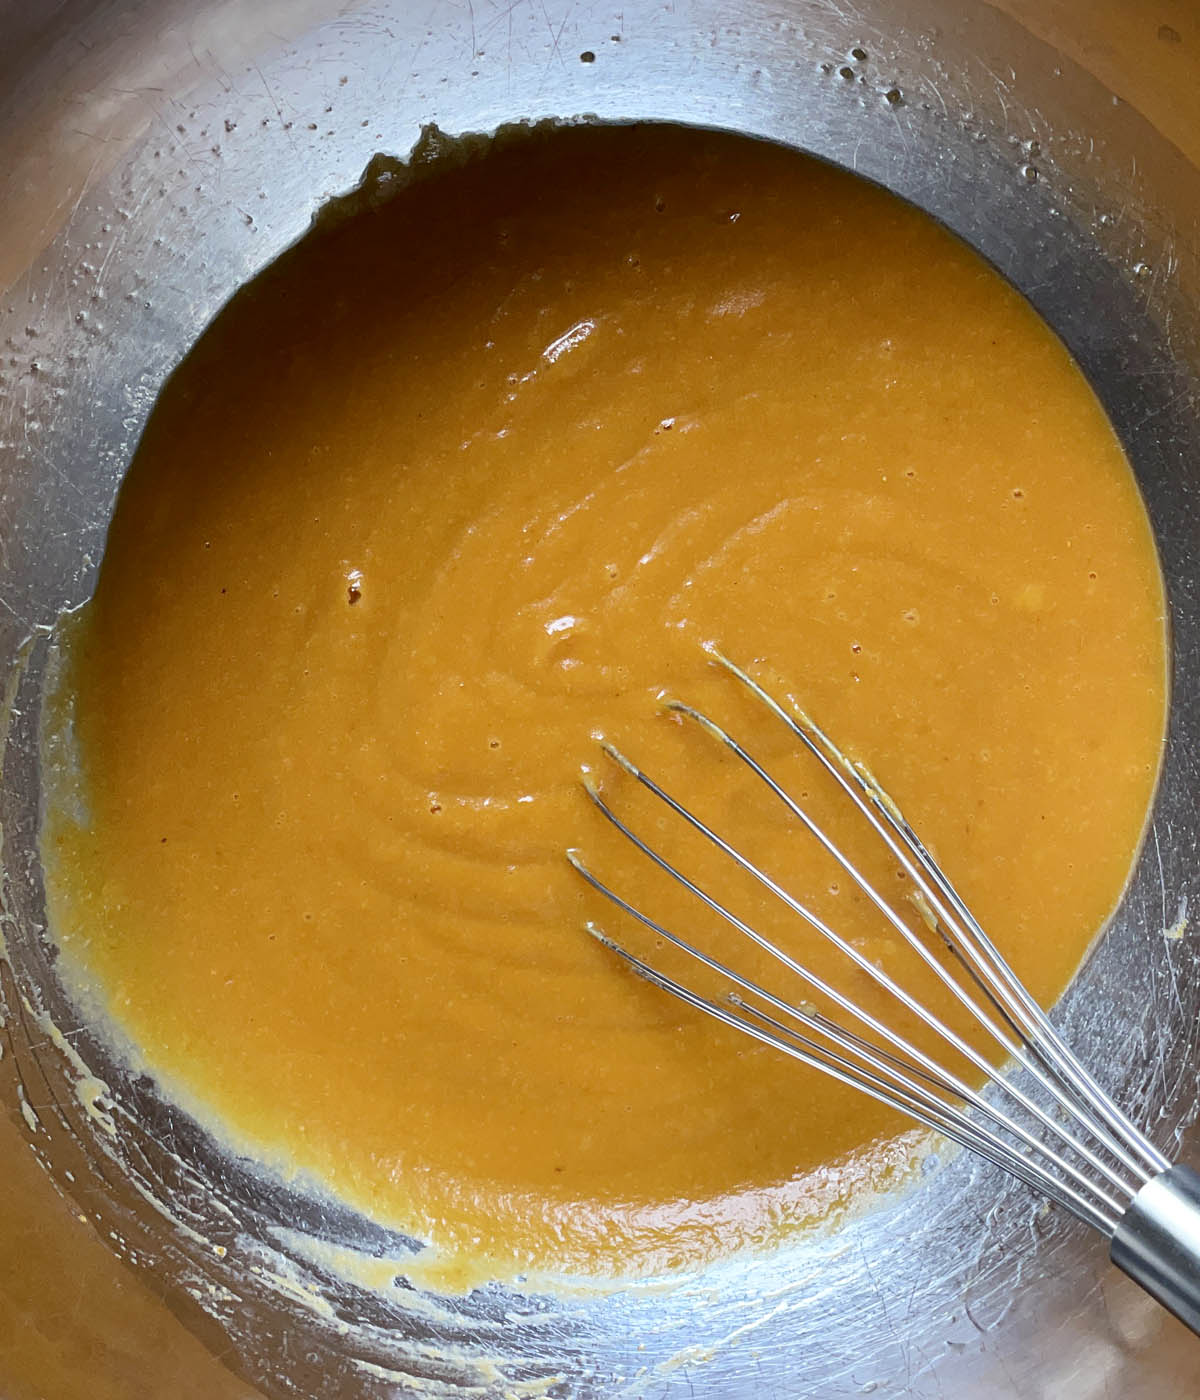 A metal round bowl containing an orange liquid and a whisk.